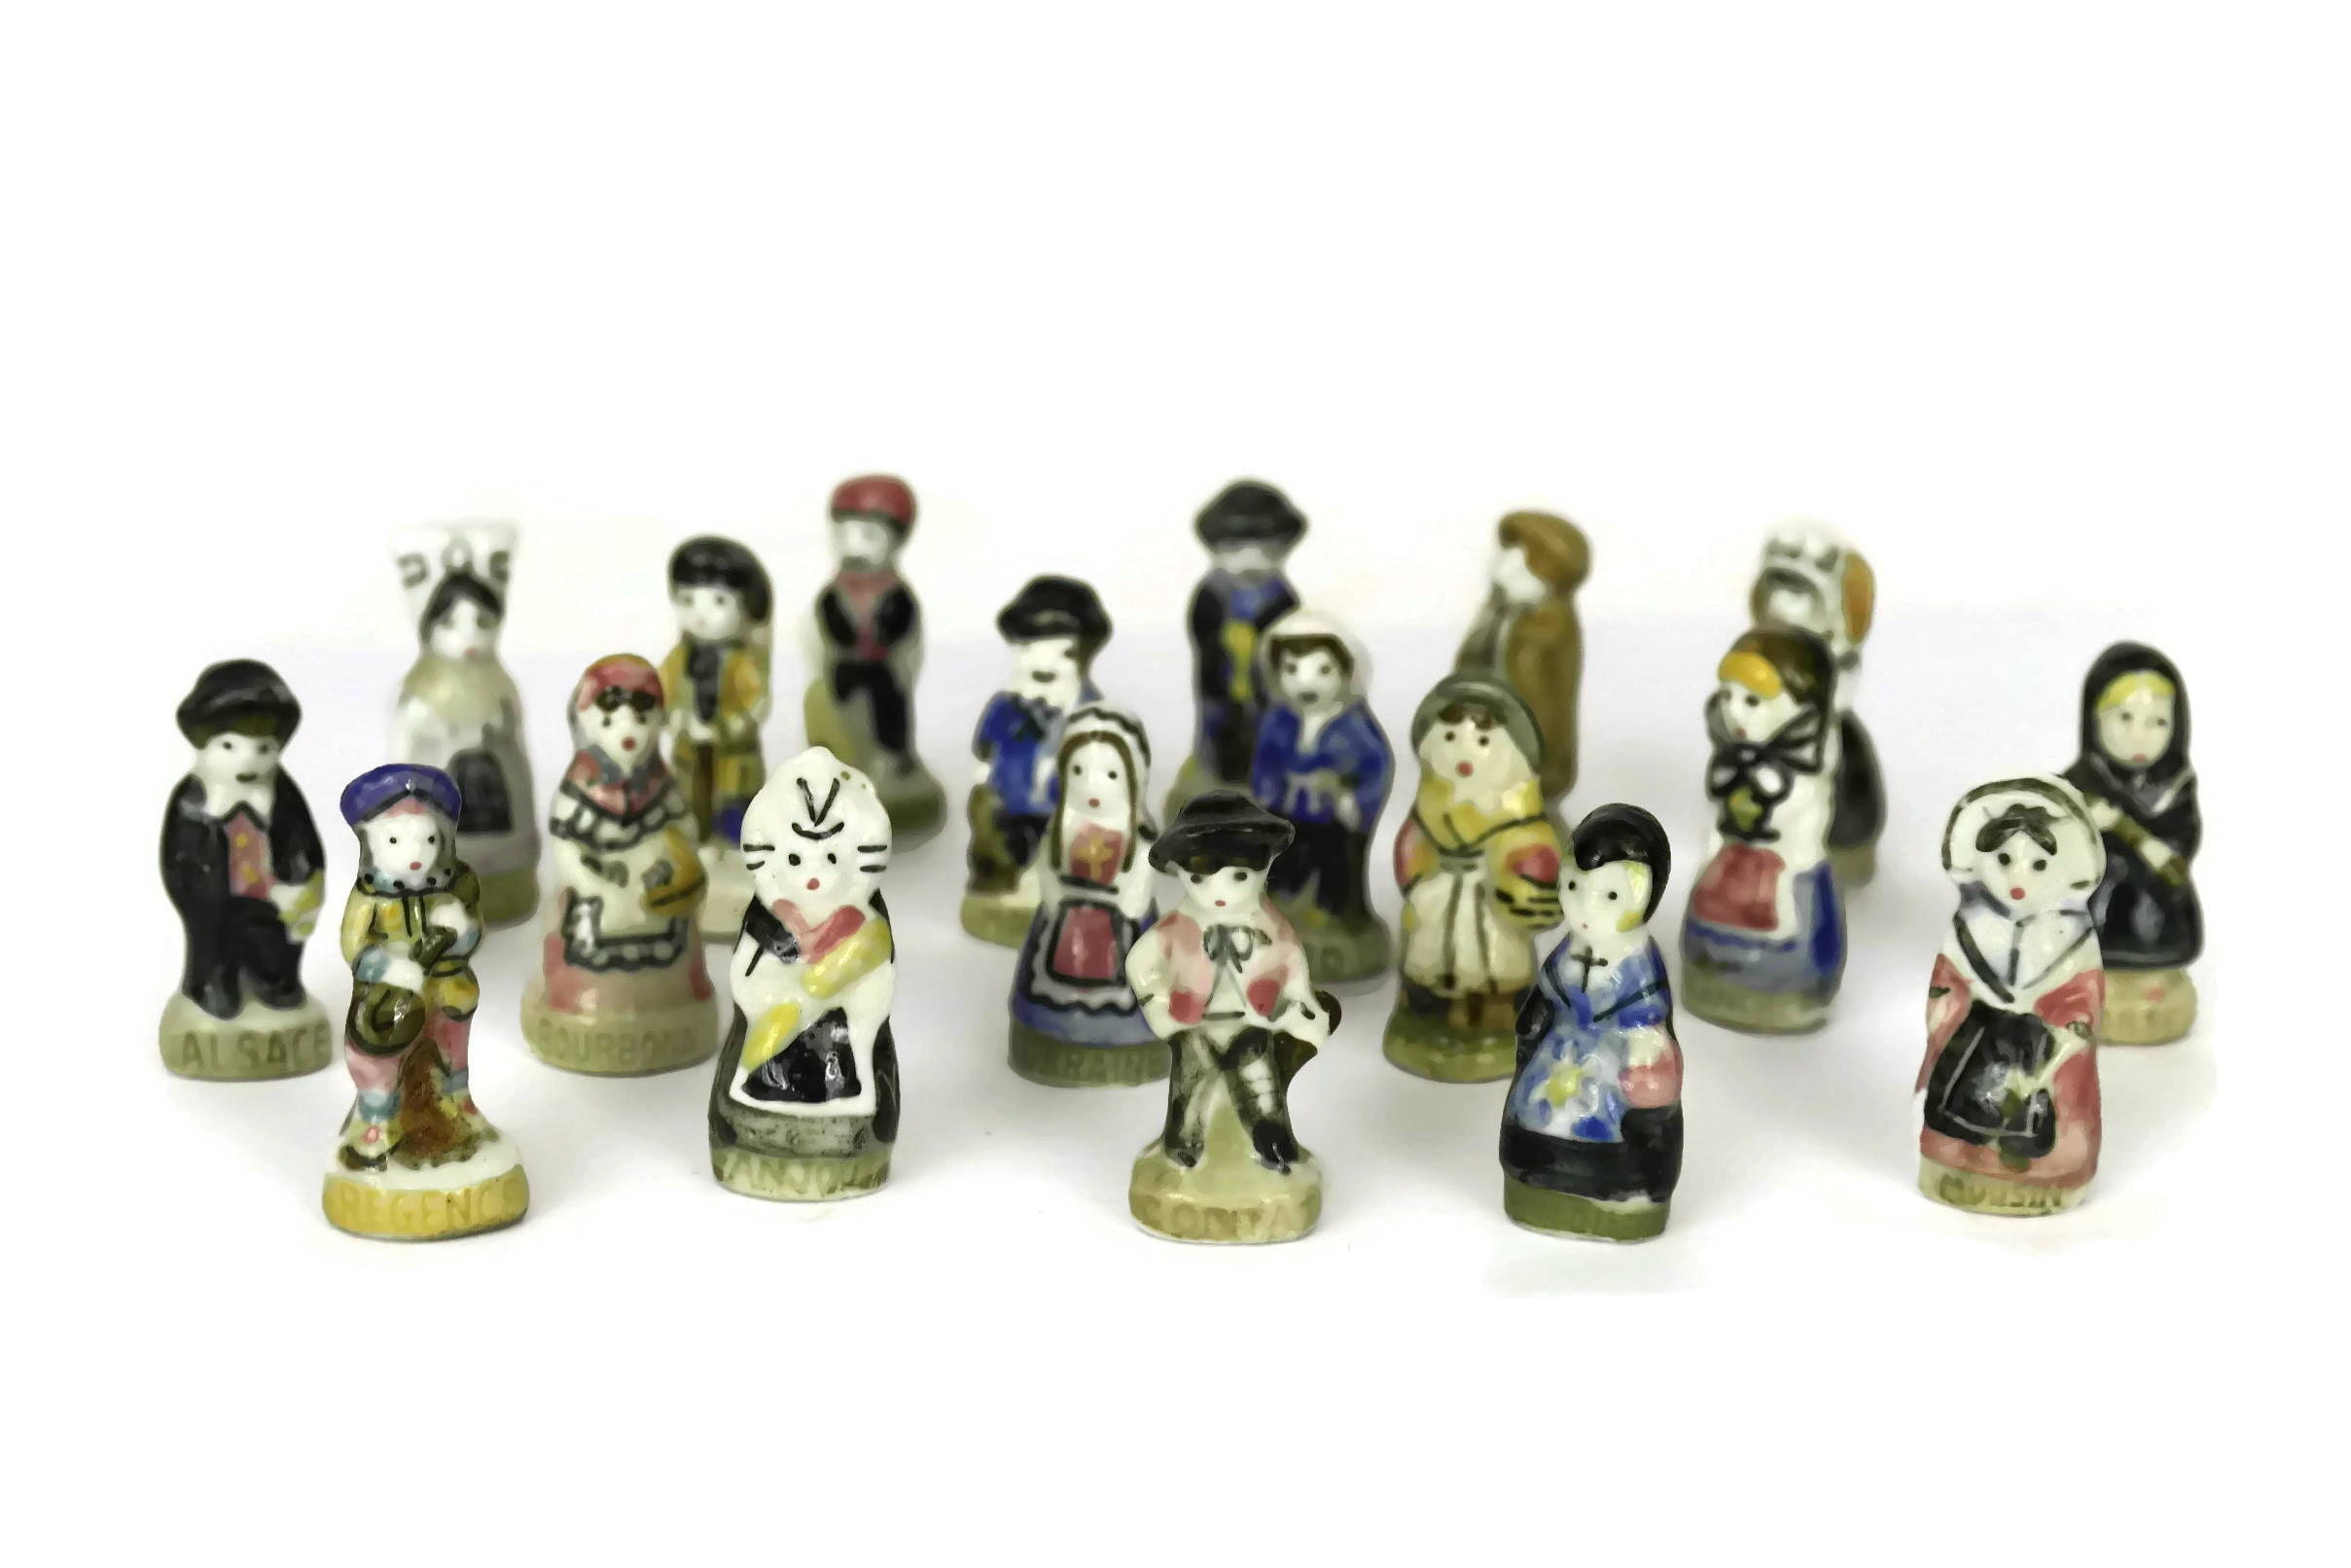 Miniature Porcelain Doll Figurines. Vintage French Feves Collection